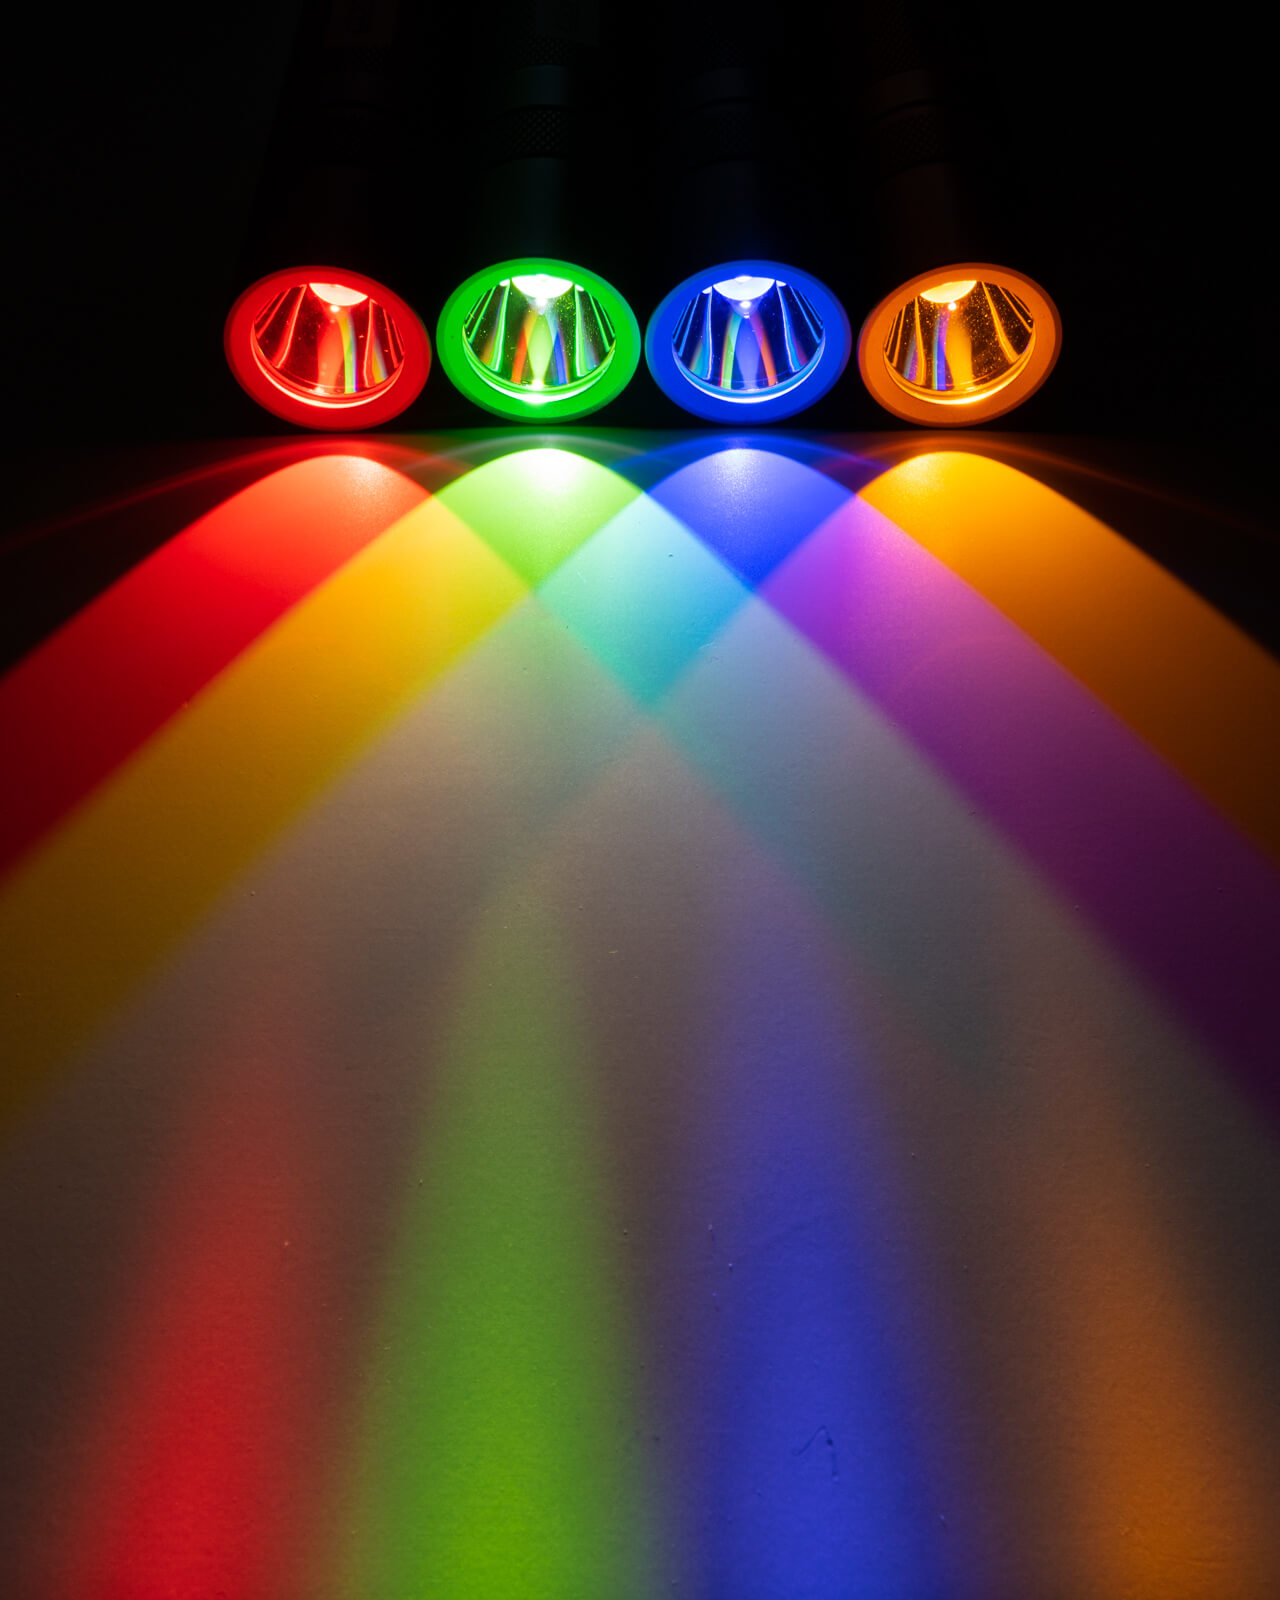 Convoy S2+ torches. with Osram CSLNM1.23 (Red), F1 (Green broad spectrum), .14 (Blue), and .FY (Orange-Yellow broad spectrum) emitters.